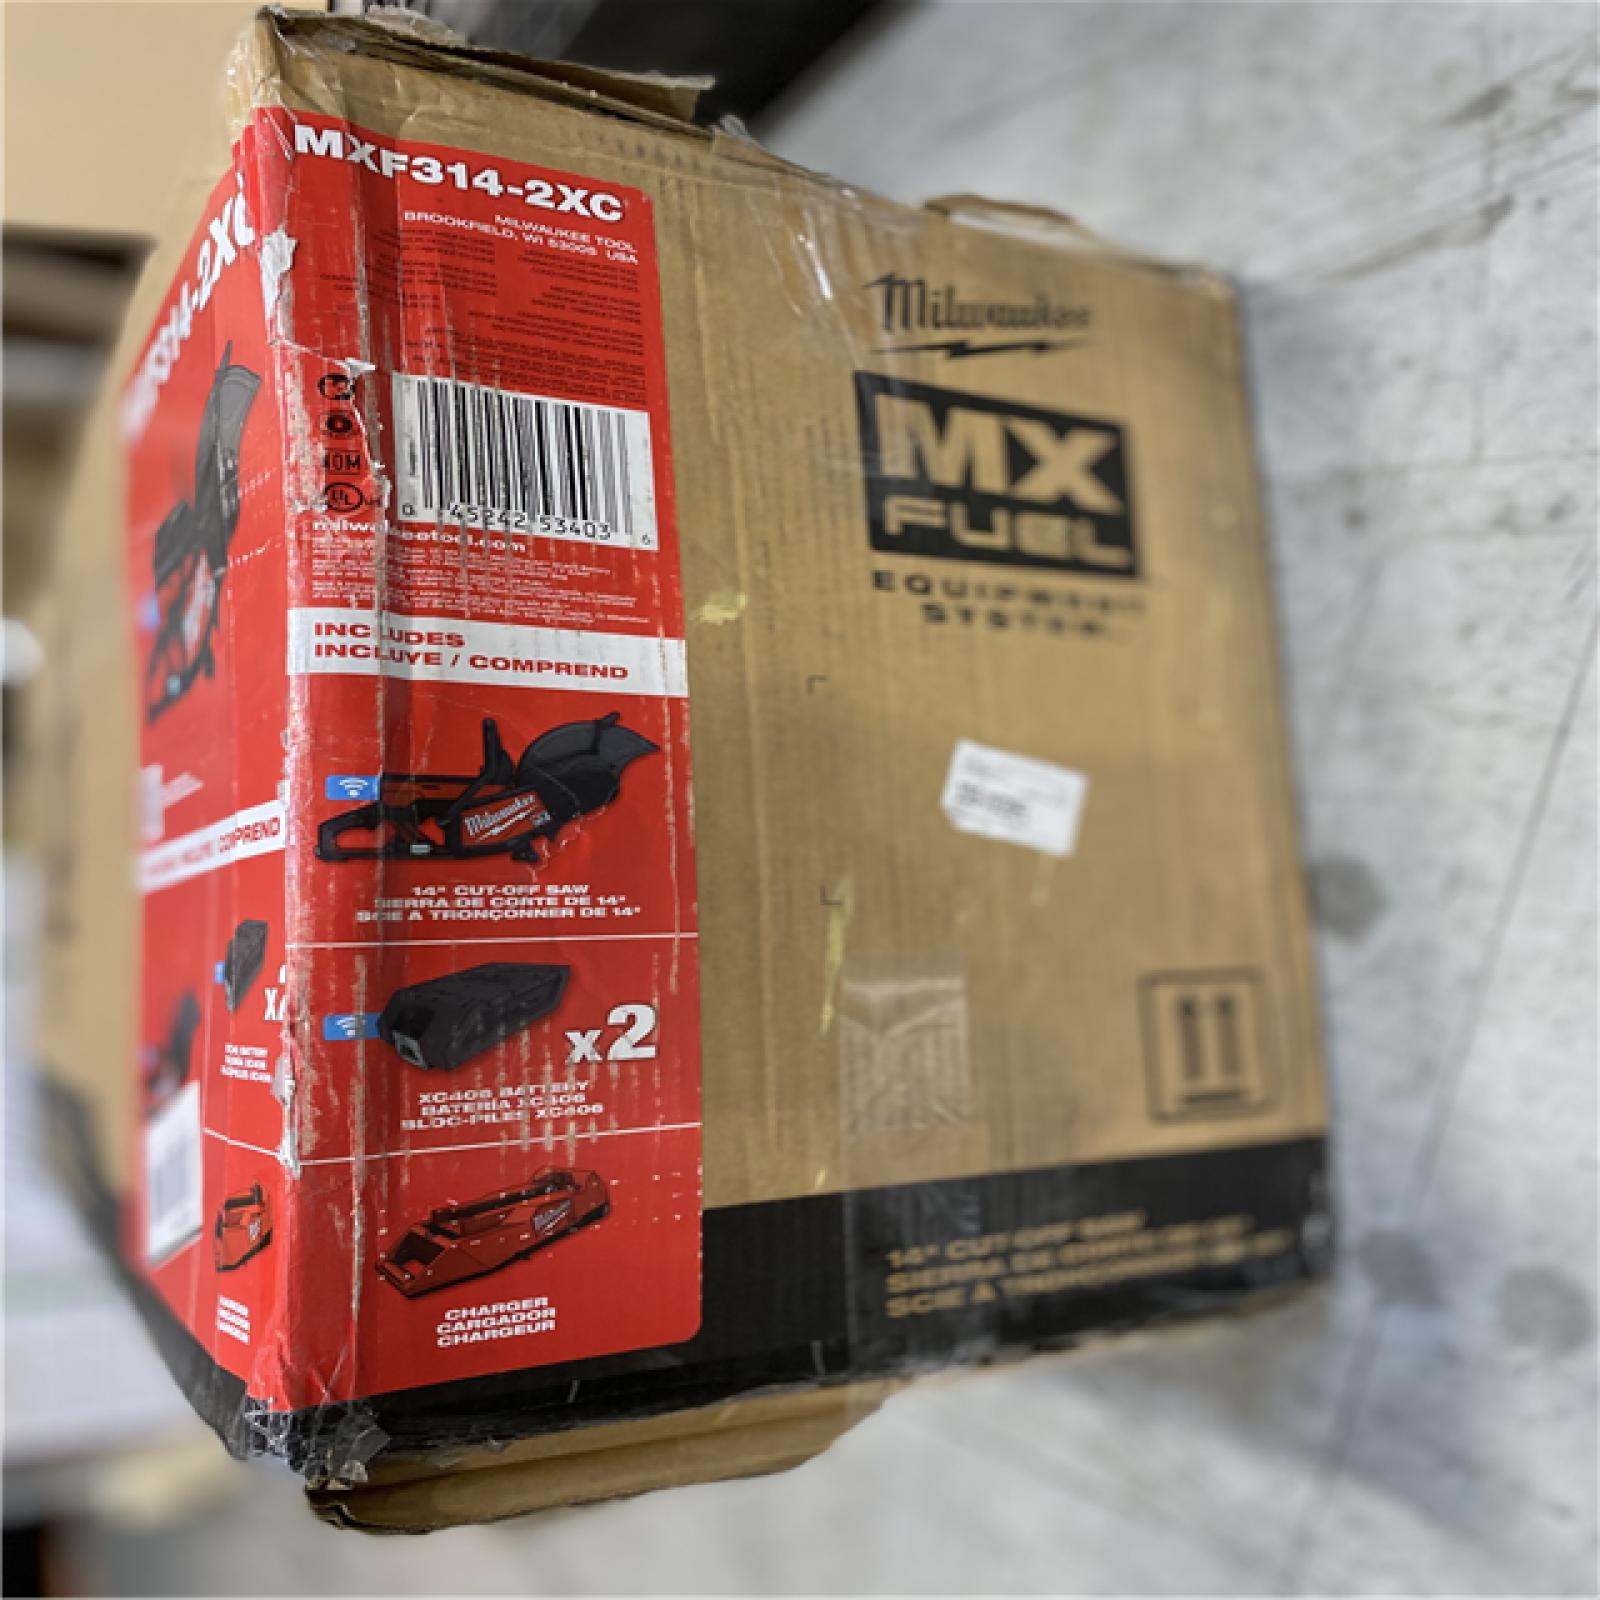 DALLAS LOCATION - Milwaukee MX FUEL Lithium-Ion Cordless 14 in. Cut Off Saw Kit with (2) Batteries and Charger